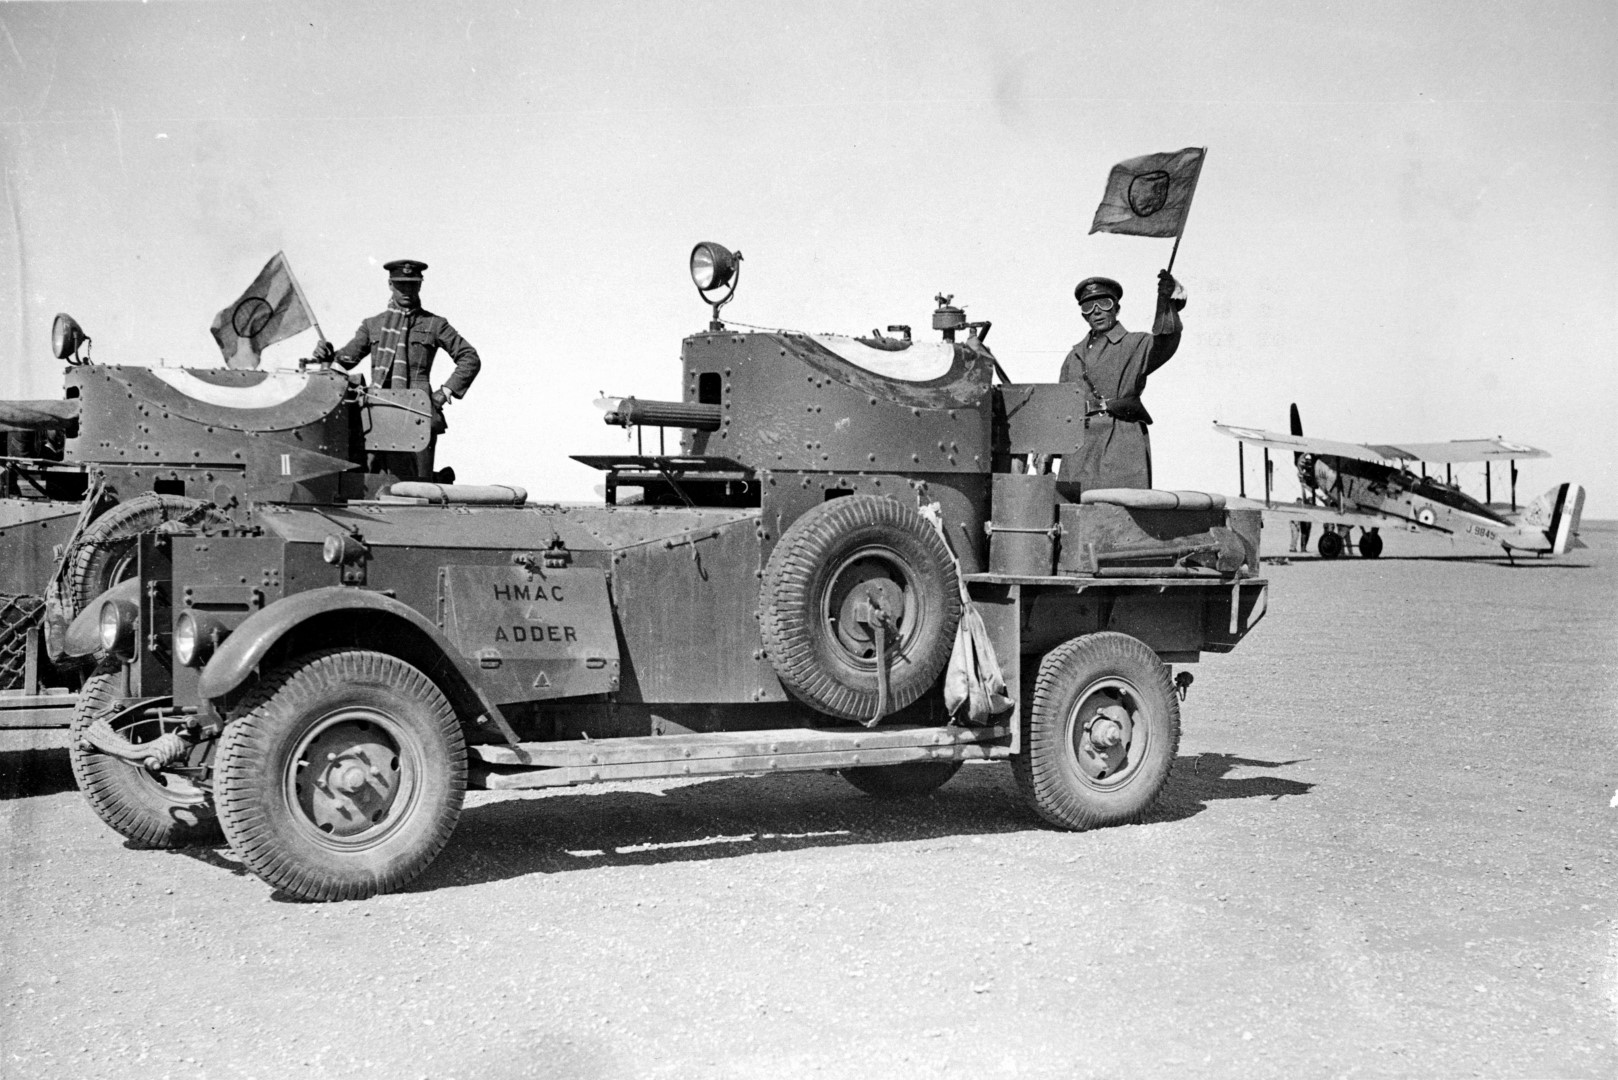 An armored car, vital to the British force crossing the desert. An RAF biplane is at right.